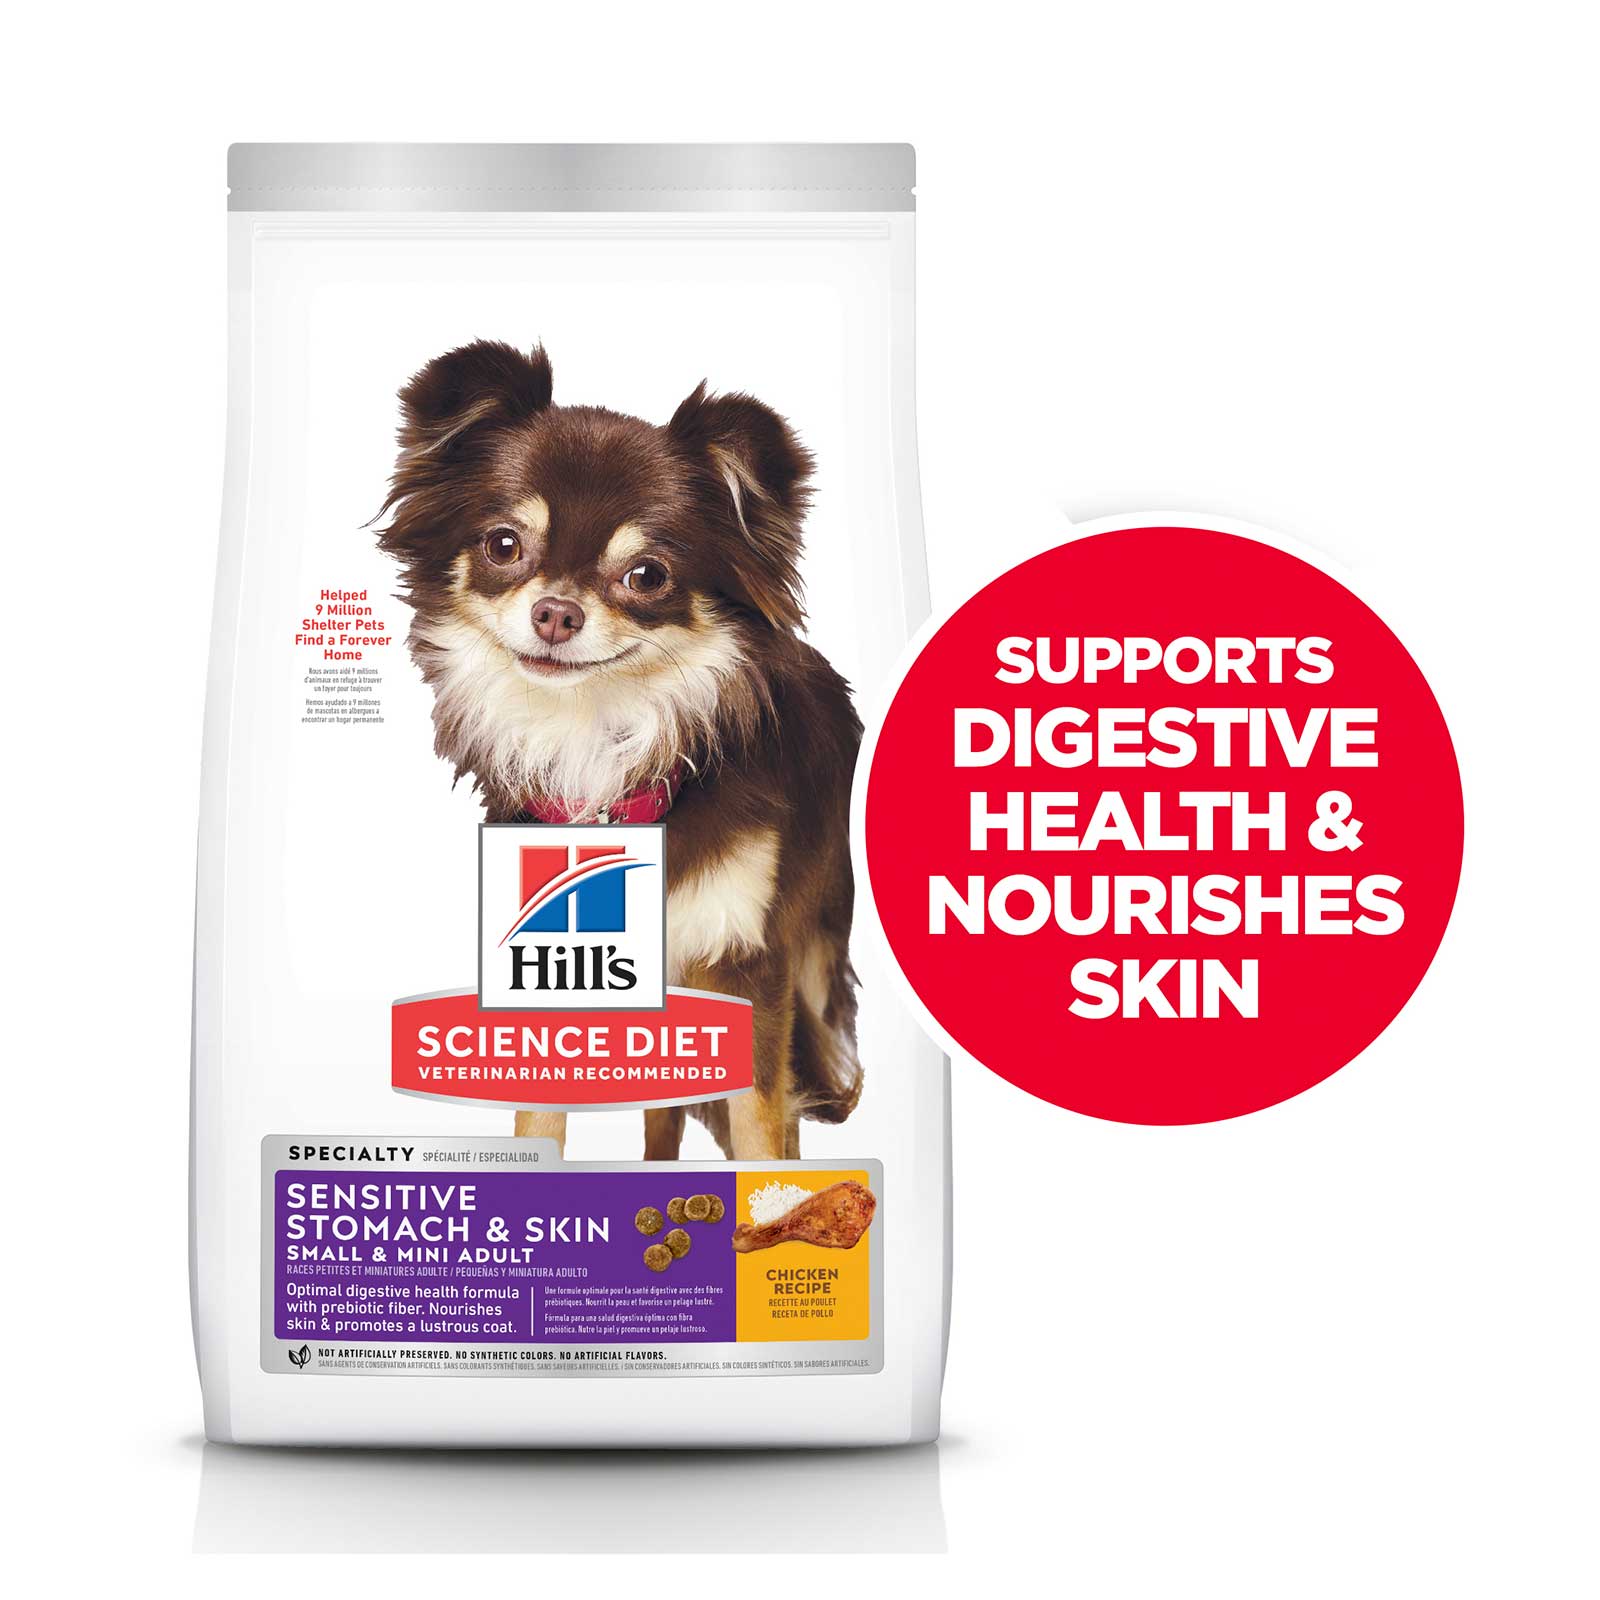 Hill's Science Diet Dog Food Adult Sensitive Stomach & Skin Small and Mini Breed